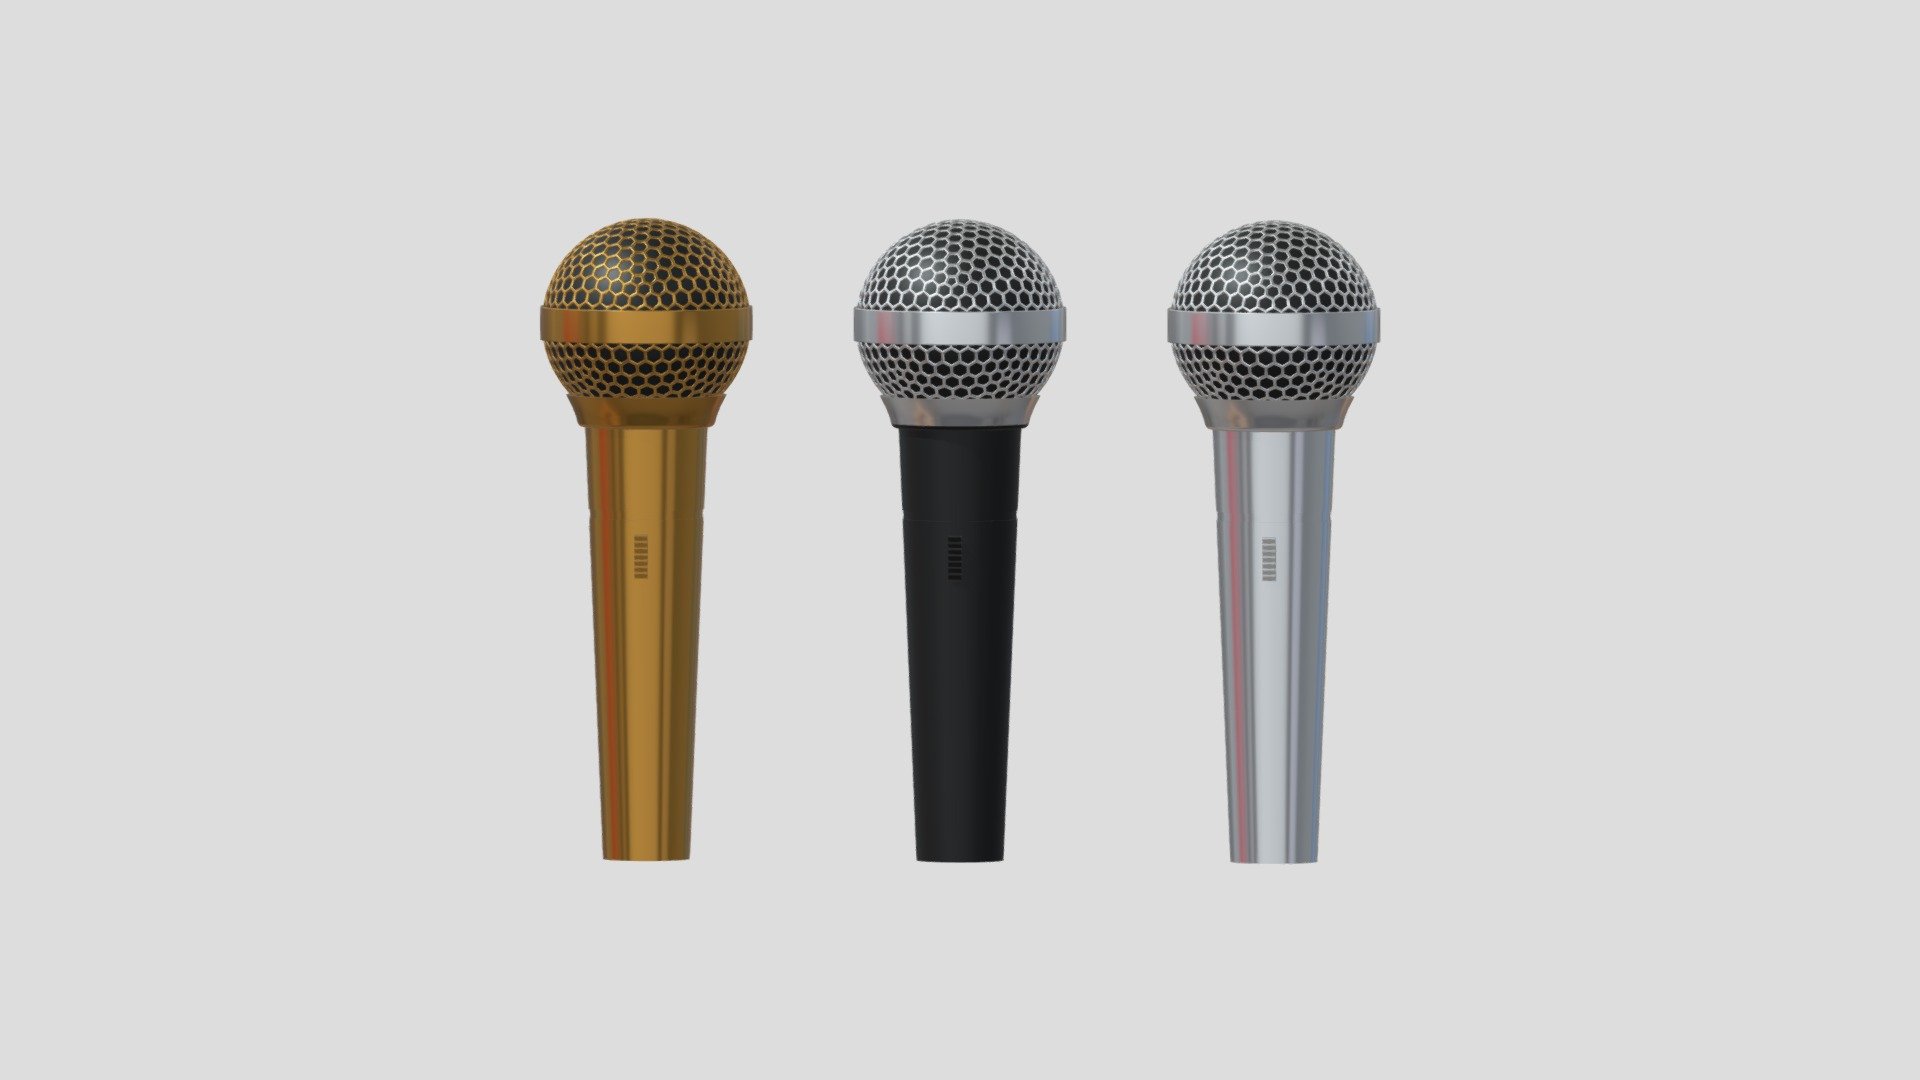 -Cartoon Microphone.

-This product contains 6 models.

-Contains 3 color microphone.

-This product was created in Blender 2.8.

-Total vertices: 12,178. Total polygons: 13,457.

-Formats: . blend . fbx . obj, c4d,dae,fbx,unity.

-We hope you enjoy this model.

-Thank you 3d model